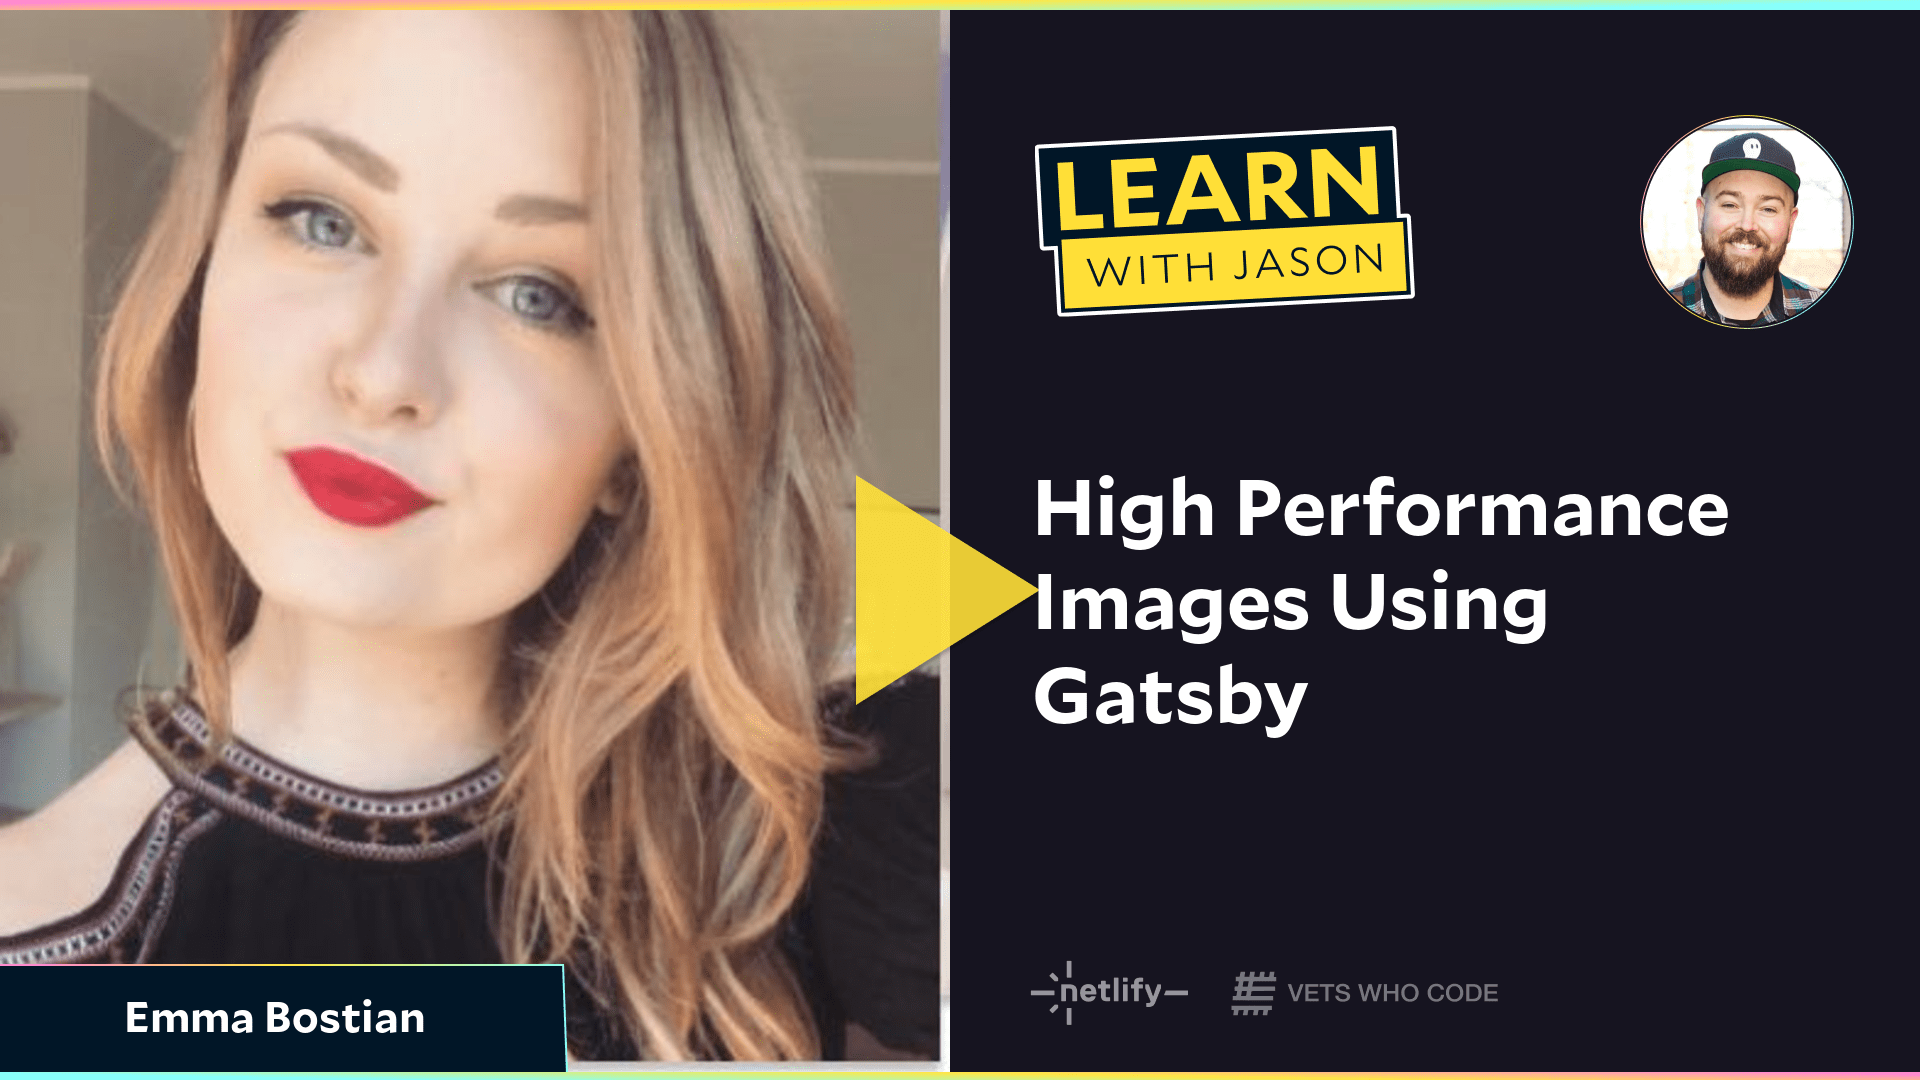 High Performance Images Using Gatsby (with Emma Bostian)